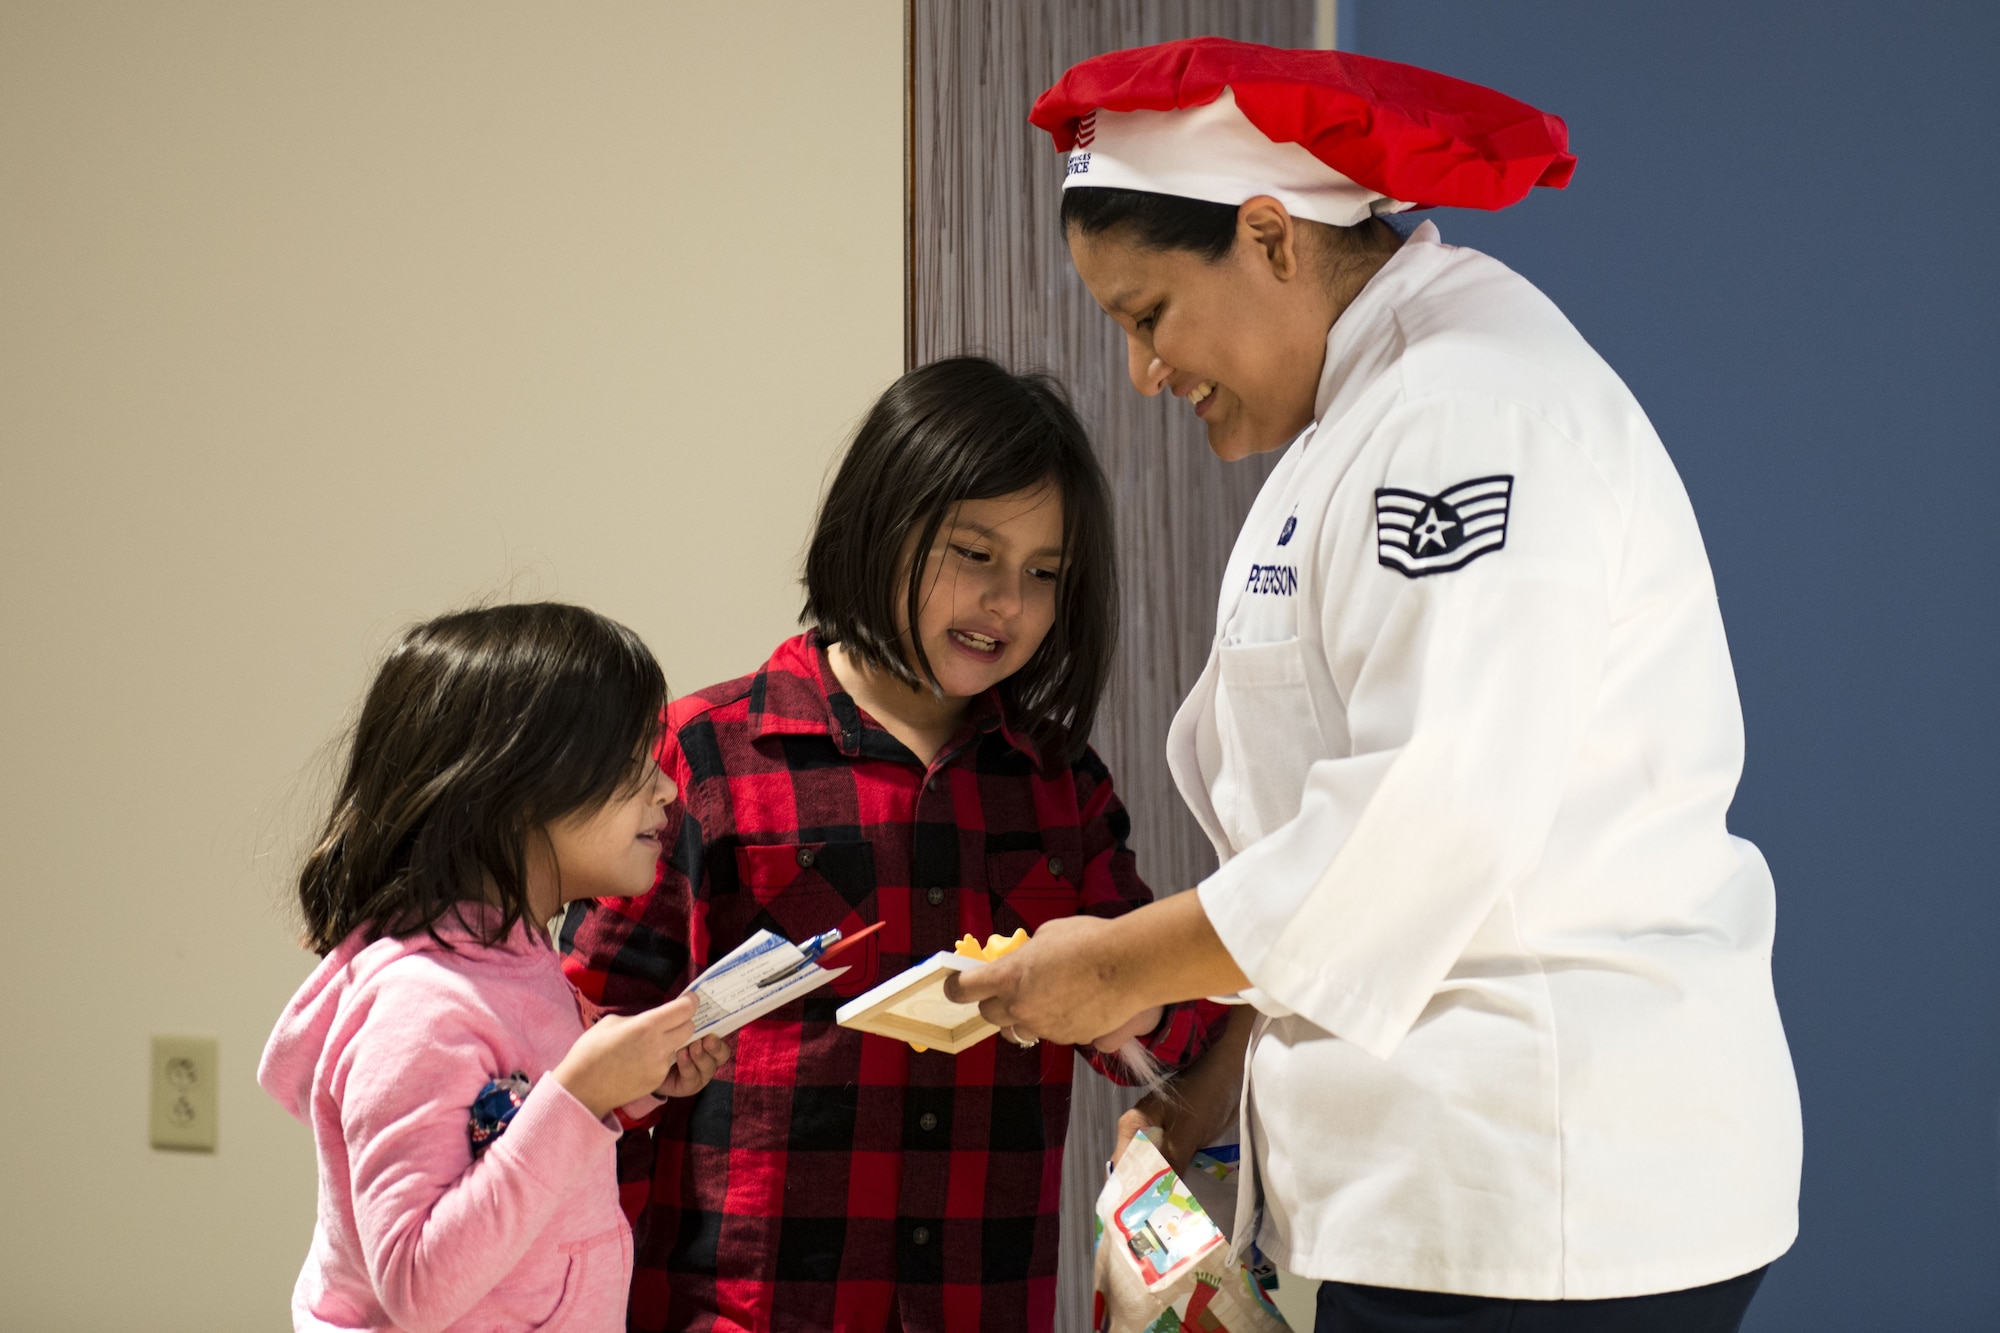 Staff Sgt. Anna Peterson, 23d Force Support Squadron dining facility manager, opens a gift from her daughters on Christmas Day in the Georgia Pines Dining Facility, Dec. 25, 2017, at Moody Air Force Base, Ga. The Christmas meal was an opportunity for Airmen, retirees, dependents and leadership to enjoy a traditional Christmas meal. (U.S. Air Force photo by Airman 1st Class Erick Requadt)